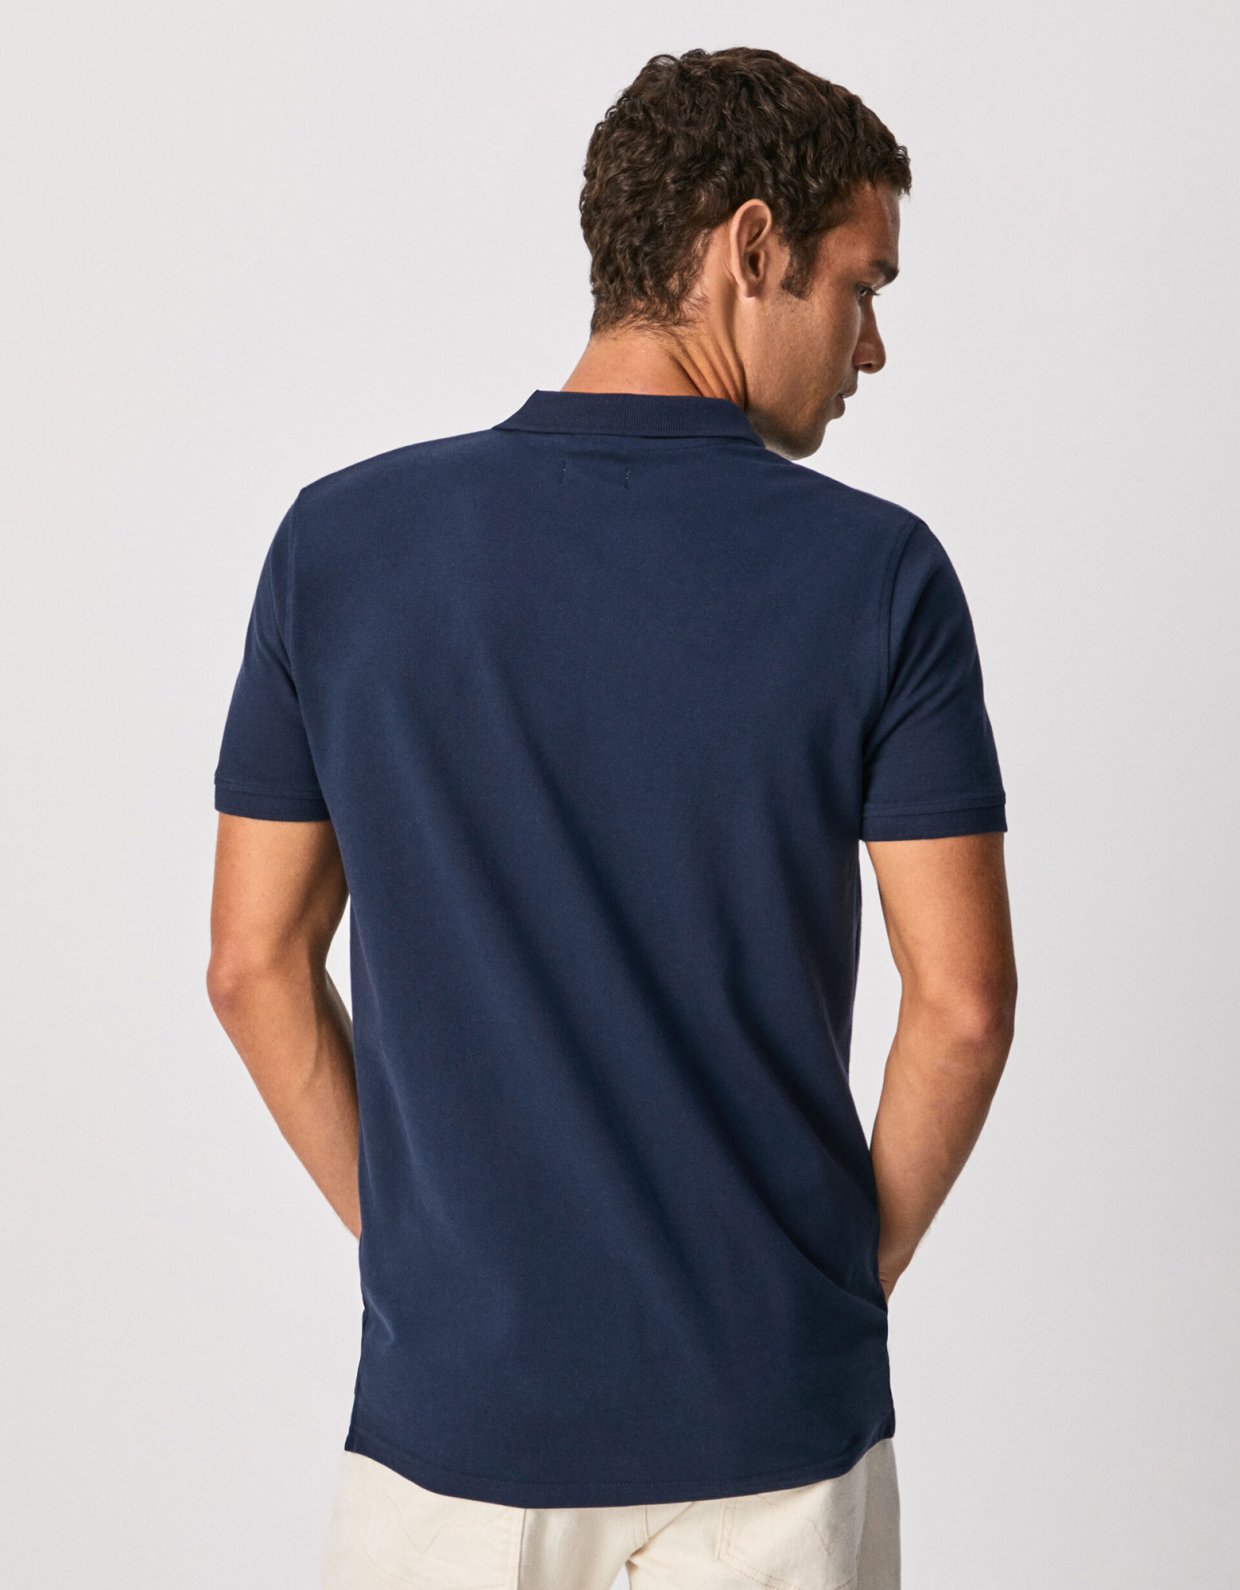 Pepe Jeans Vincent n basic polo t-shirt navy